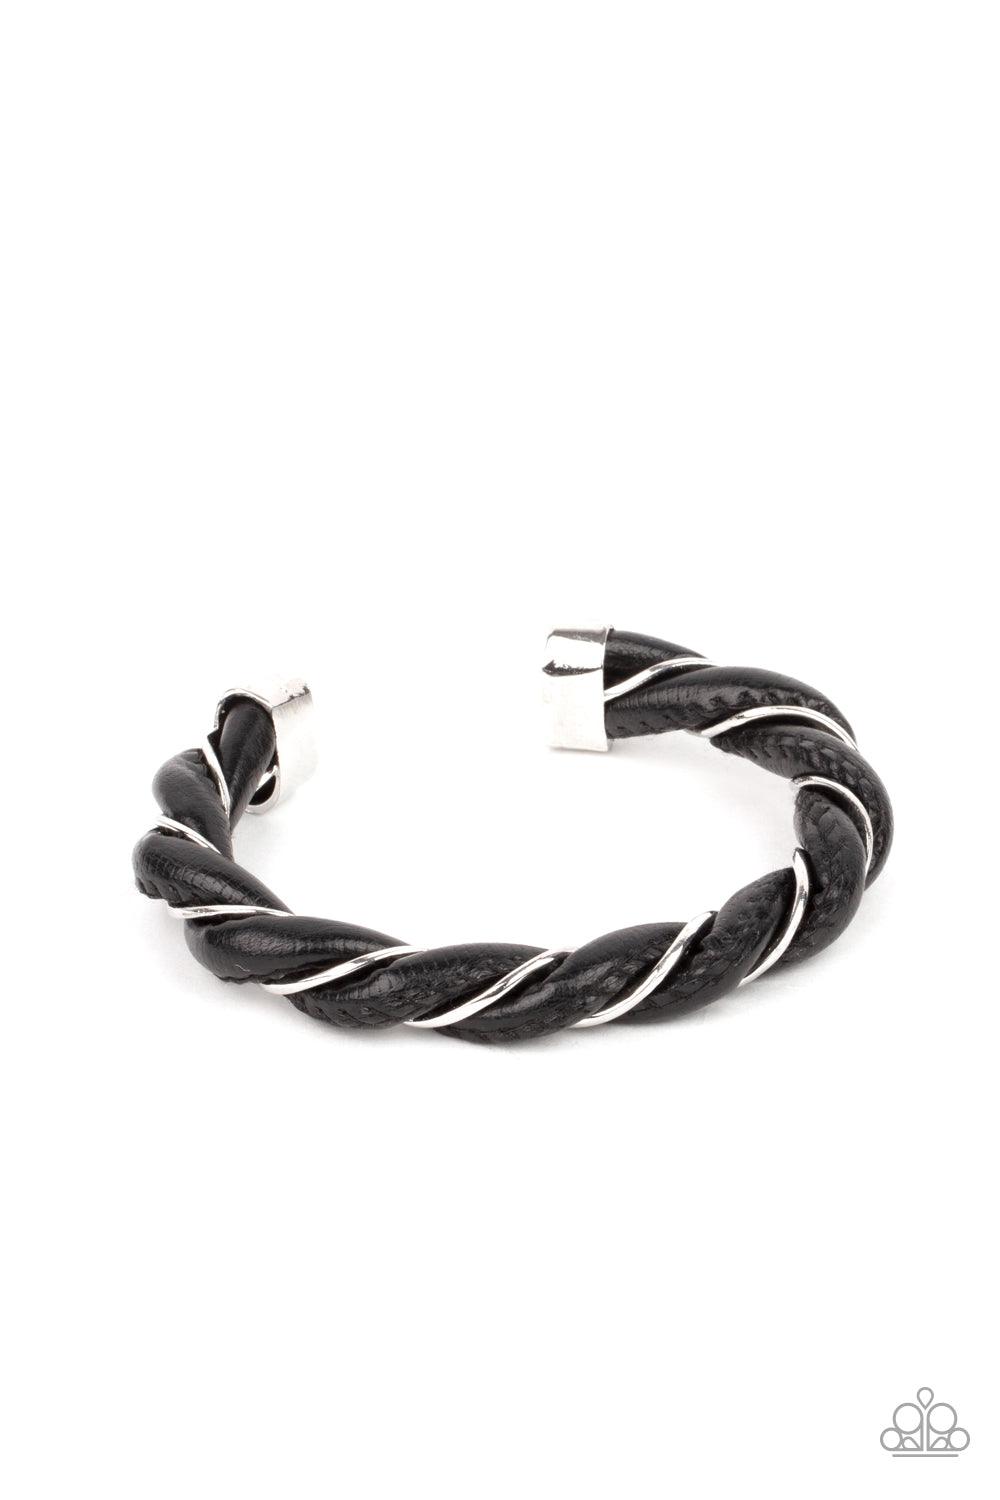 Paparazzi Accessories Rebel Relic - Black Capped in bold silver fittings, a dainty silver wire and a black leathery cord spin into an edgy cuff around the wrist. Sold as one individual bracelet. Jewelry